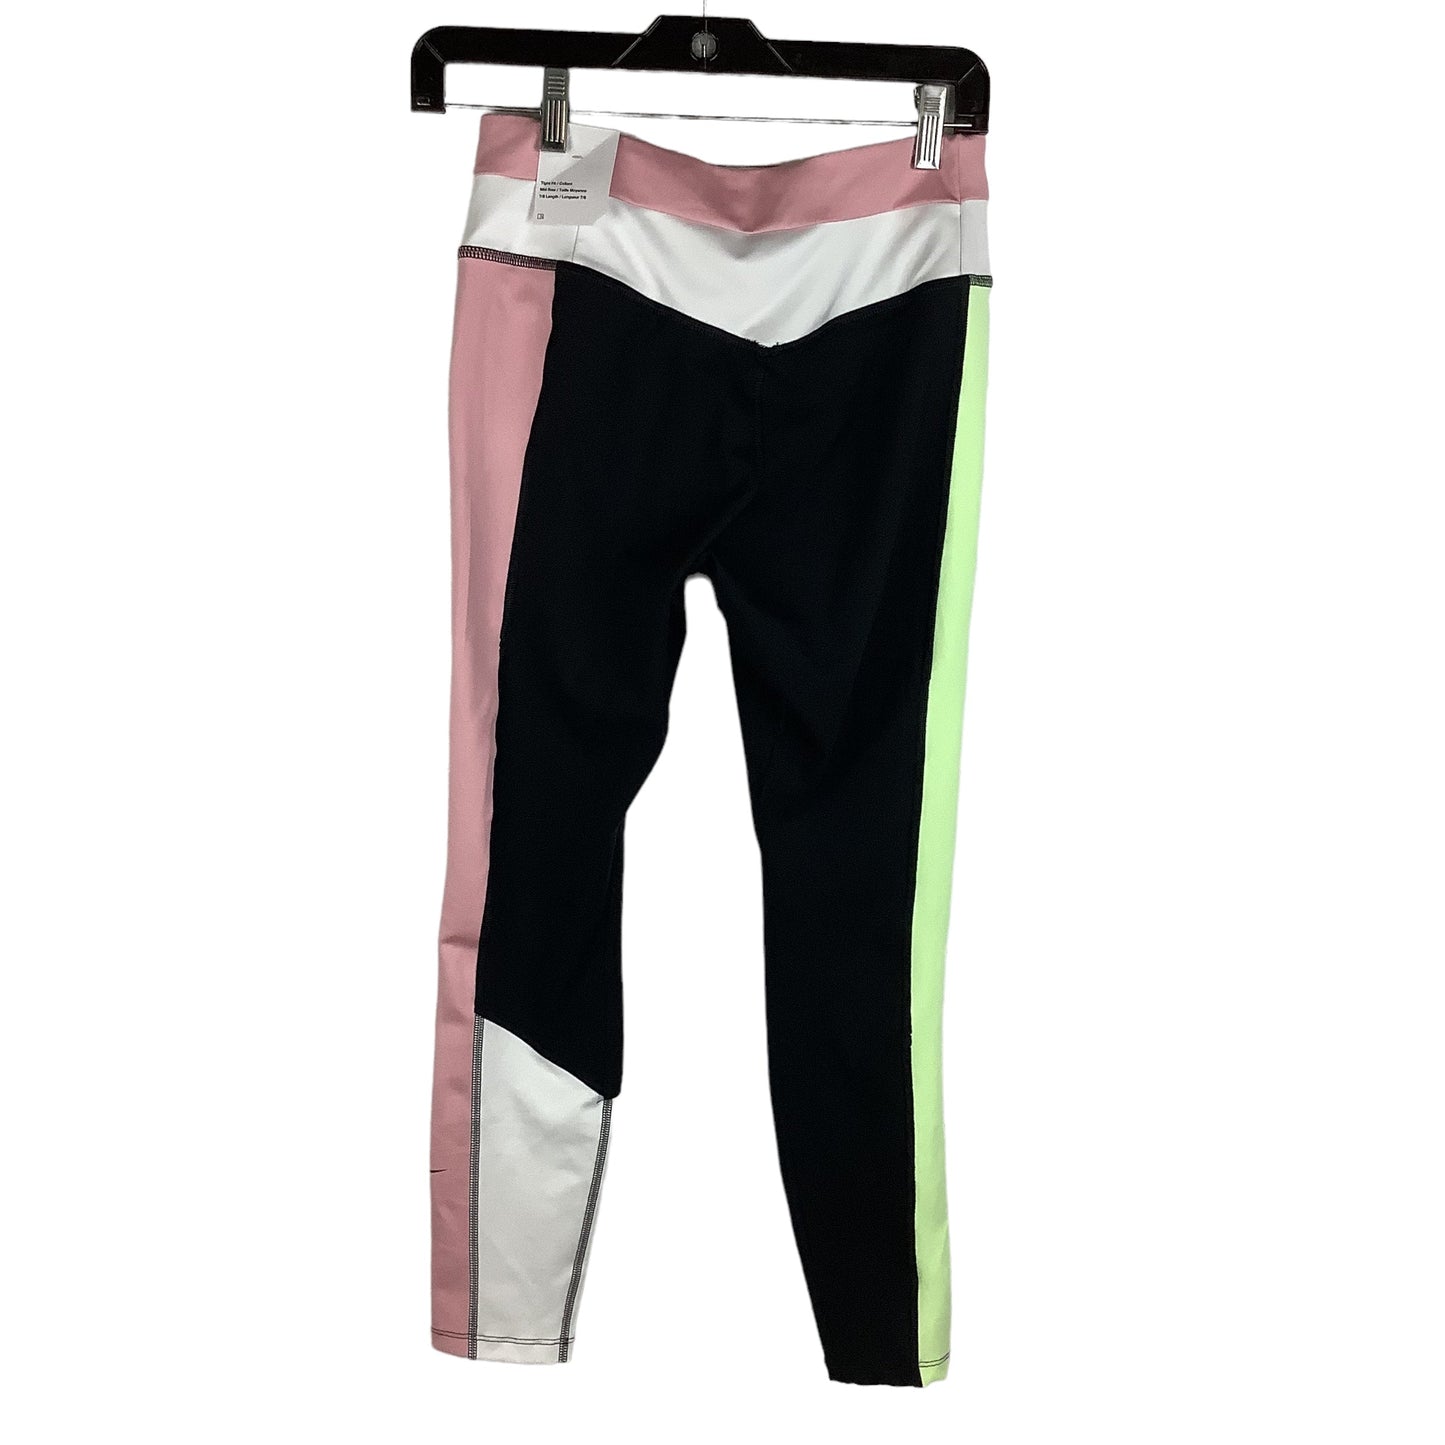 Athletic Leggings By Nike Apparel  Size: M